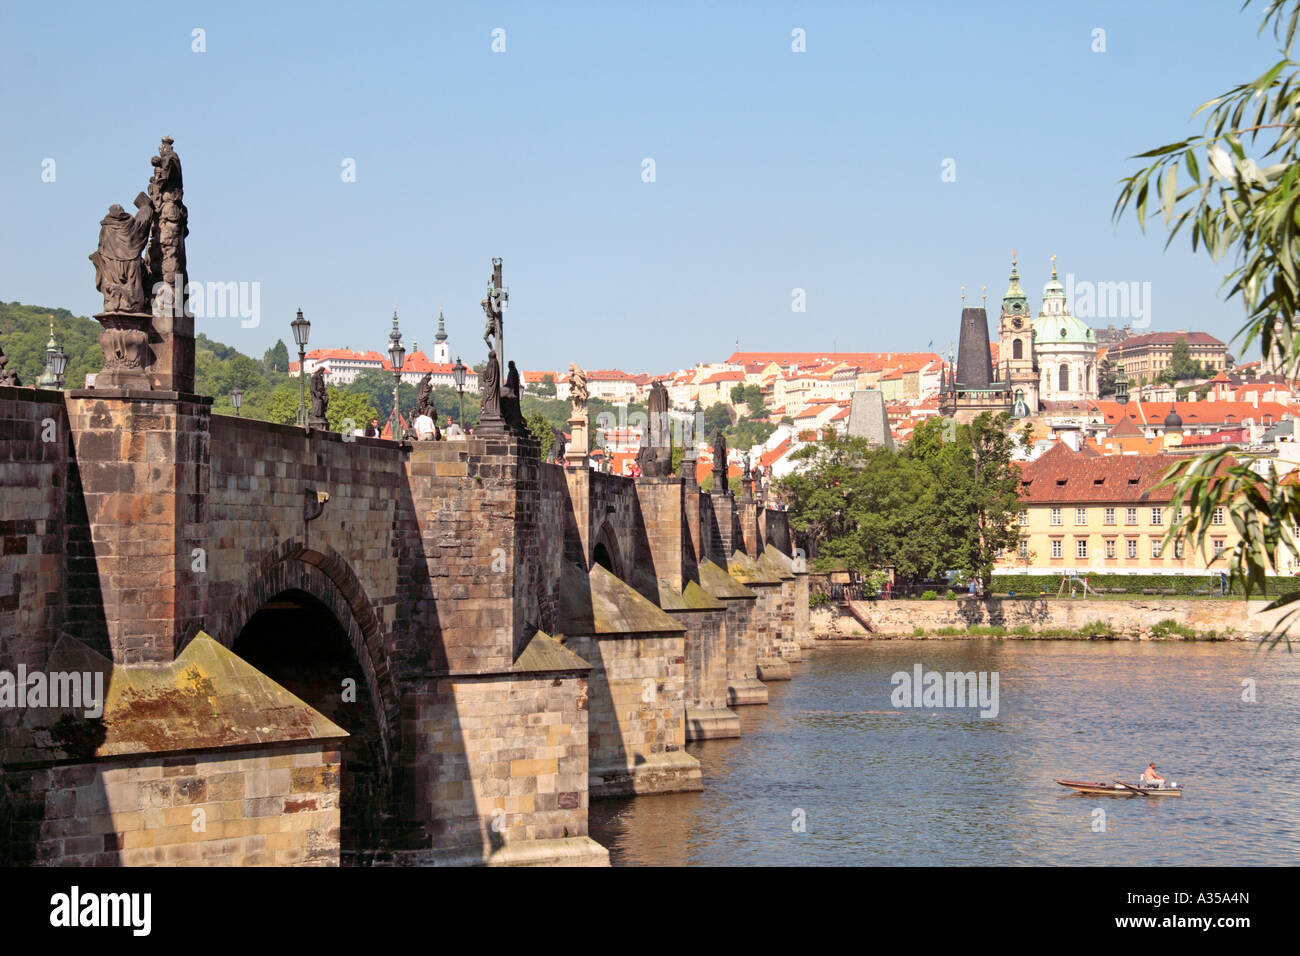 Charles Bridge over the Vltava river, Prague, with man fishing from boat in foreground Stock Photo